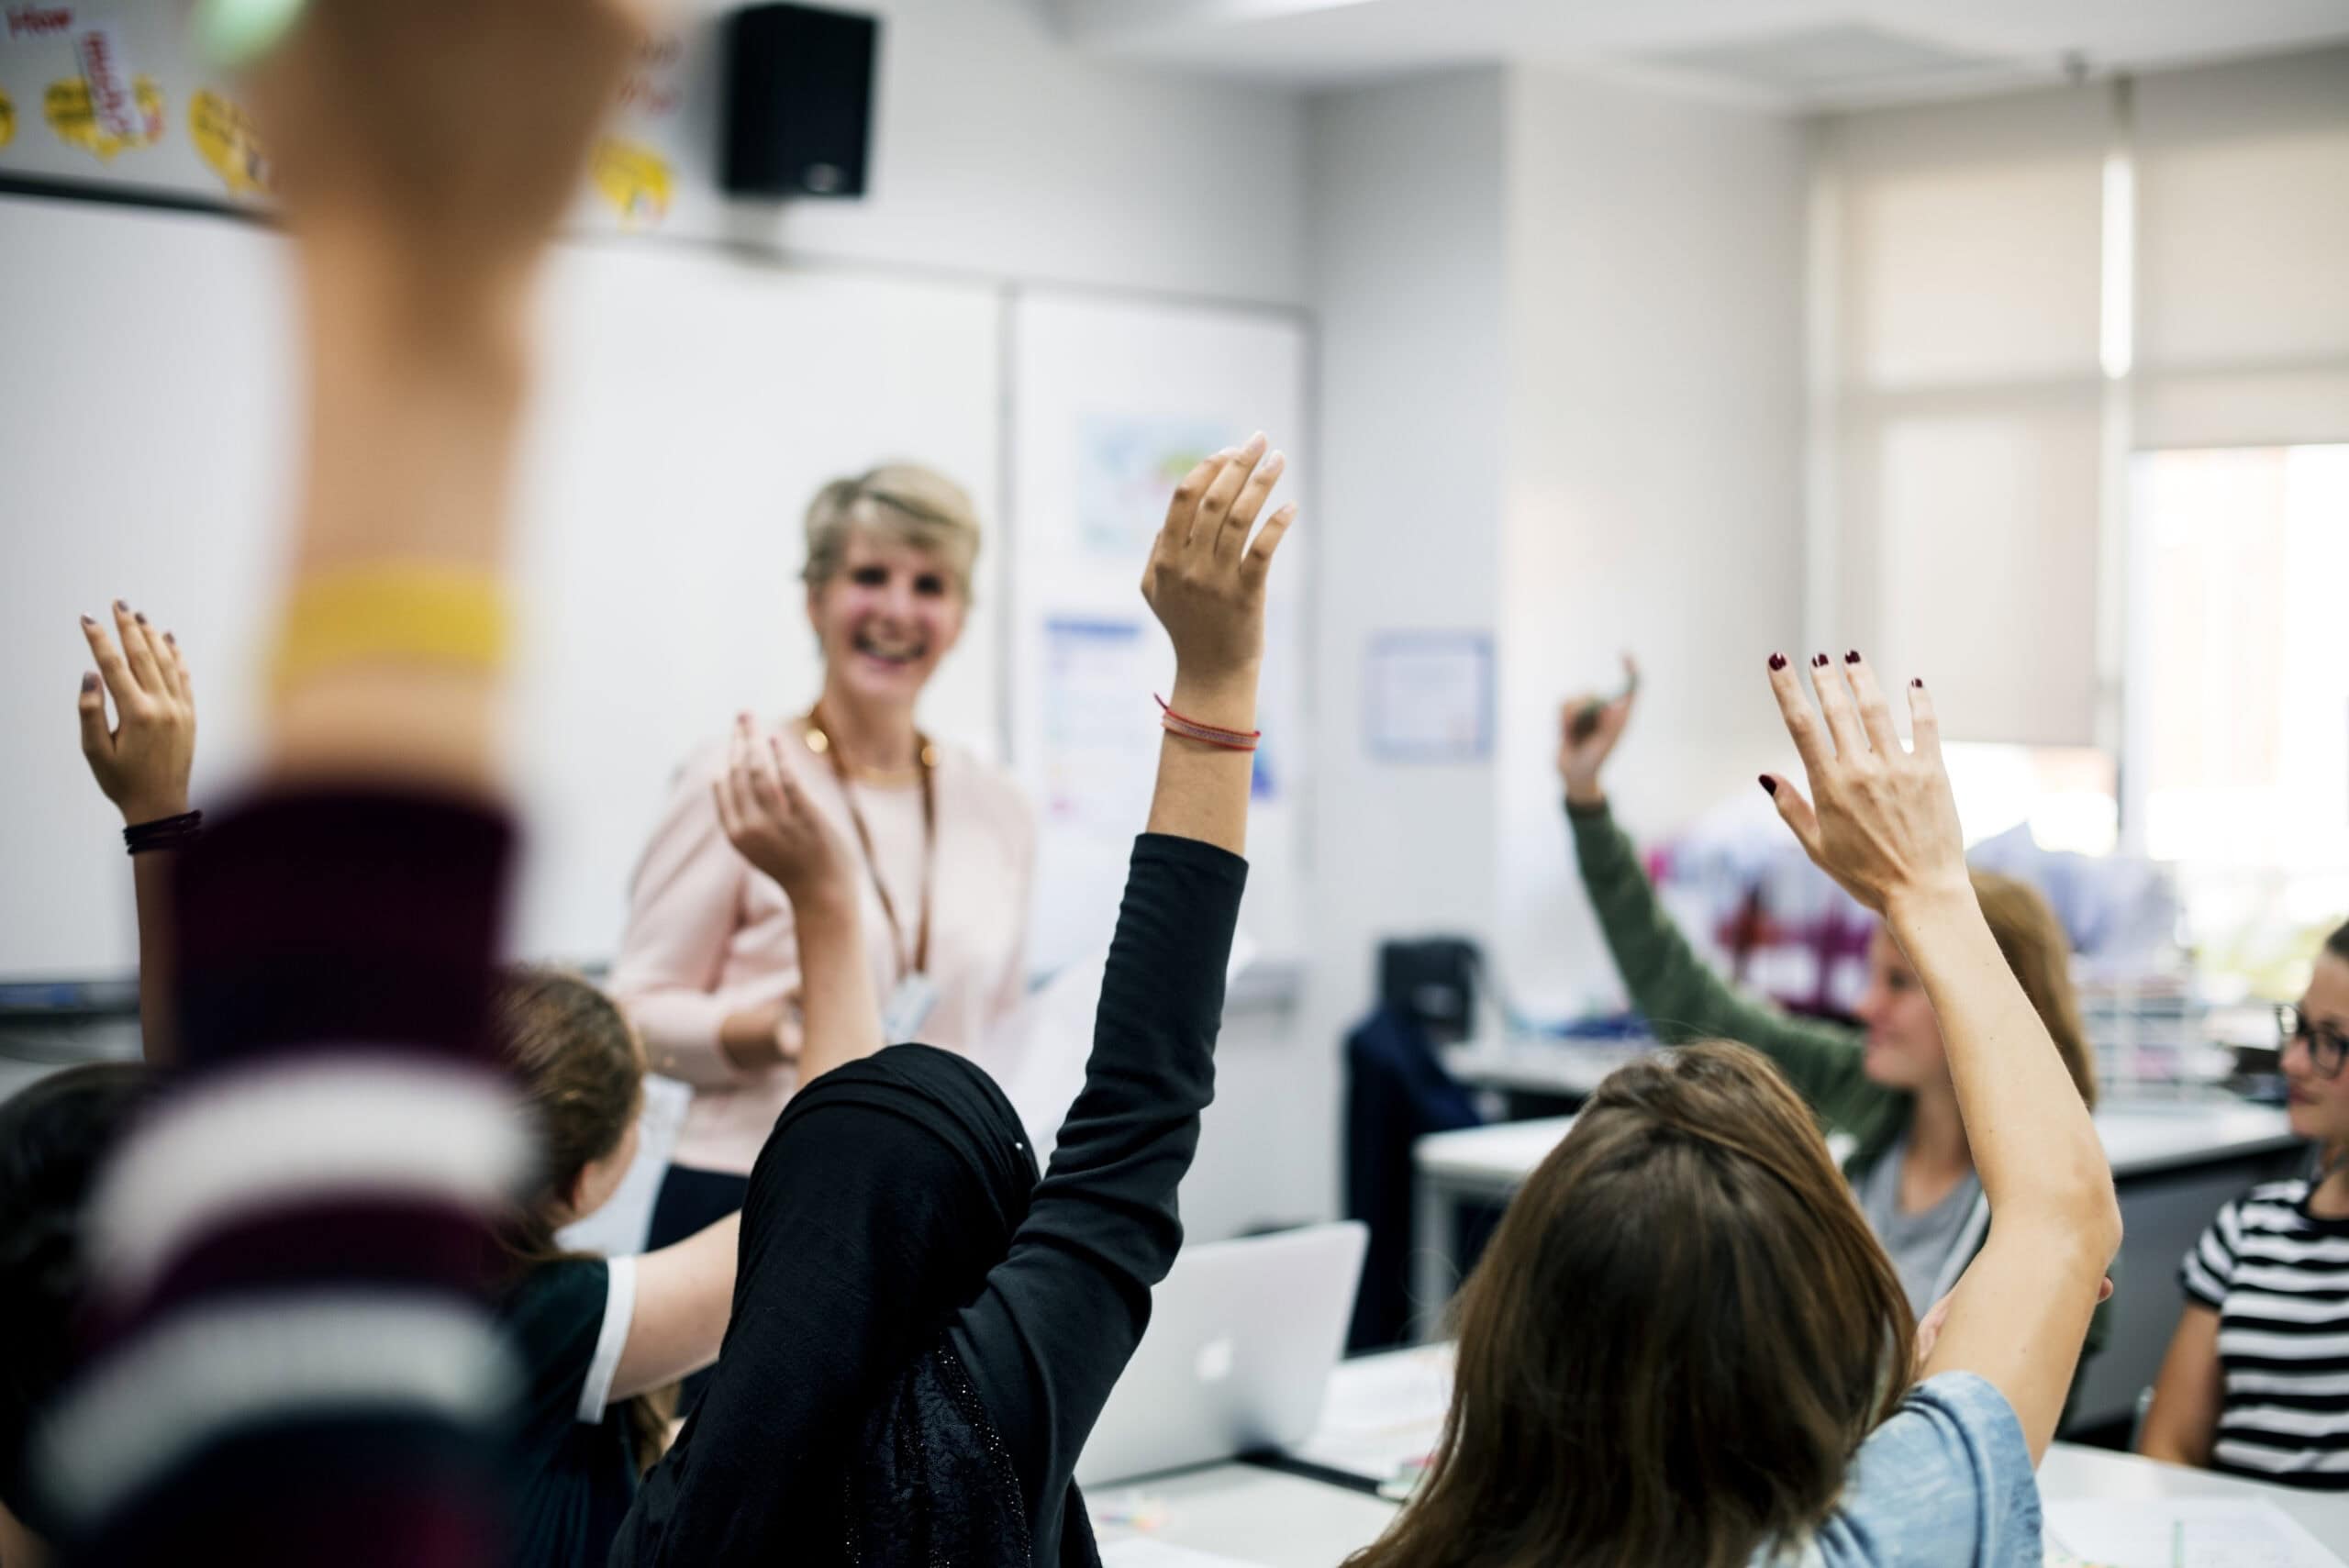 Group of students raising their hands in a classroom.